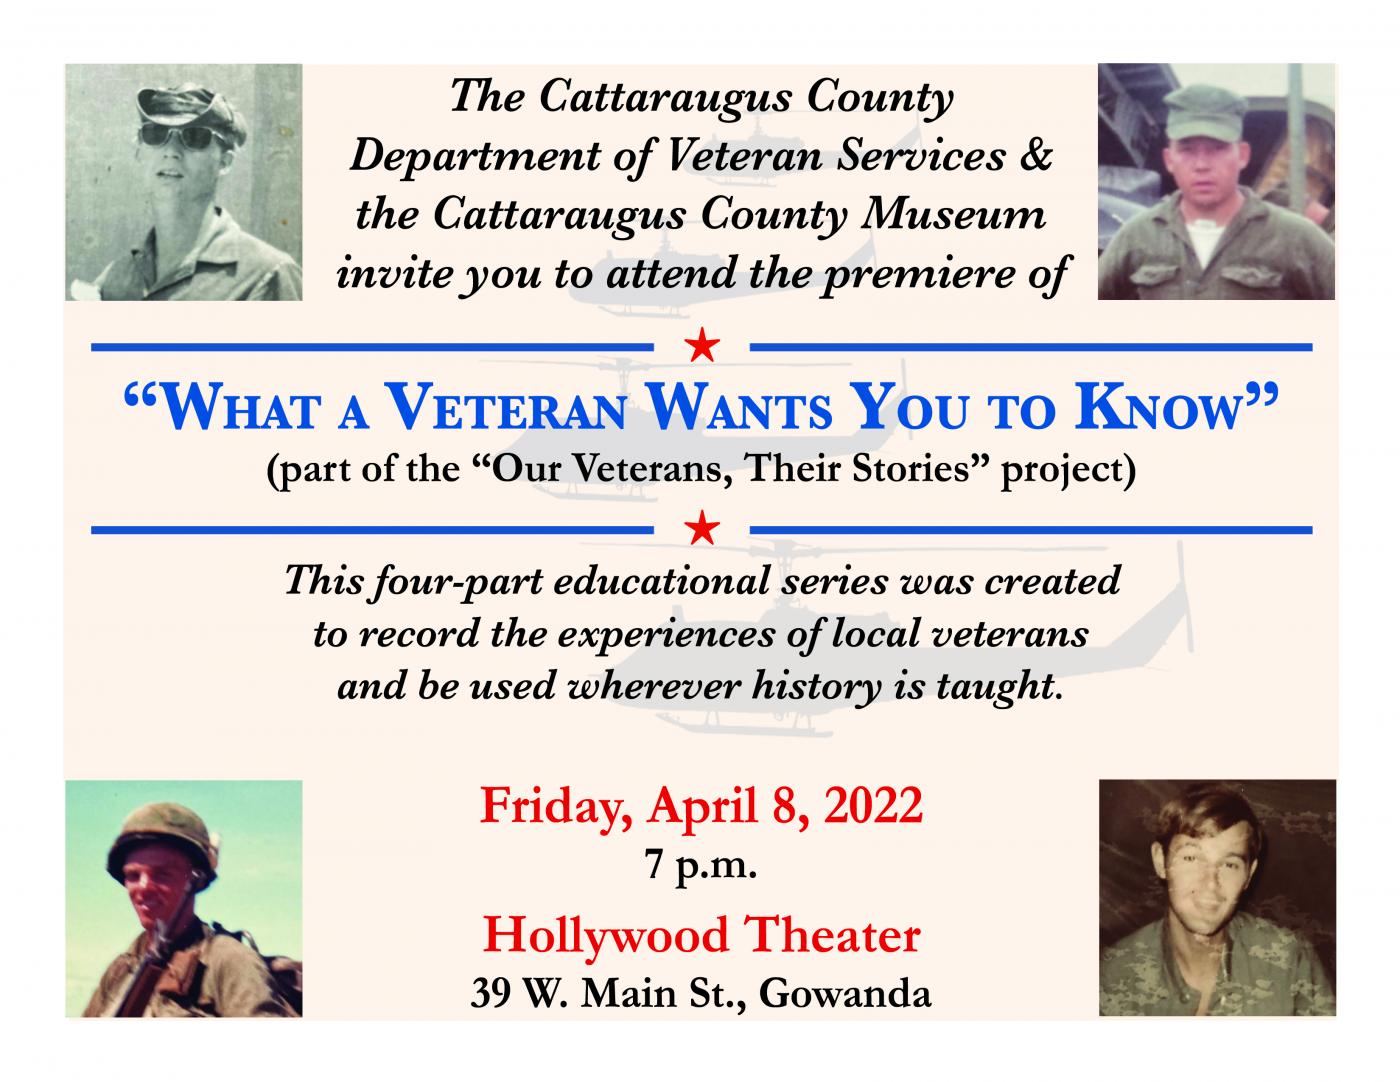 Invice for "What a Veteran Wants You to Know" on Friday, April 8, 2022 at the Hollywood Theater in Gowanda, NY